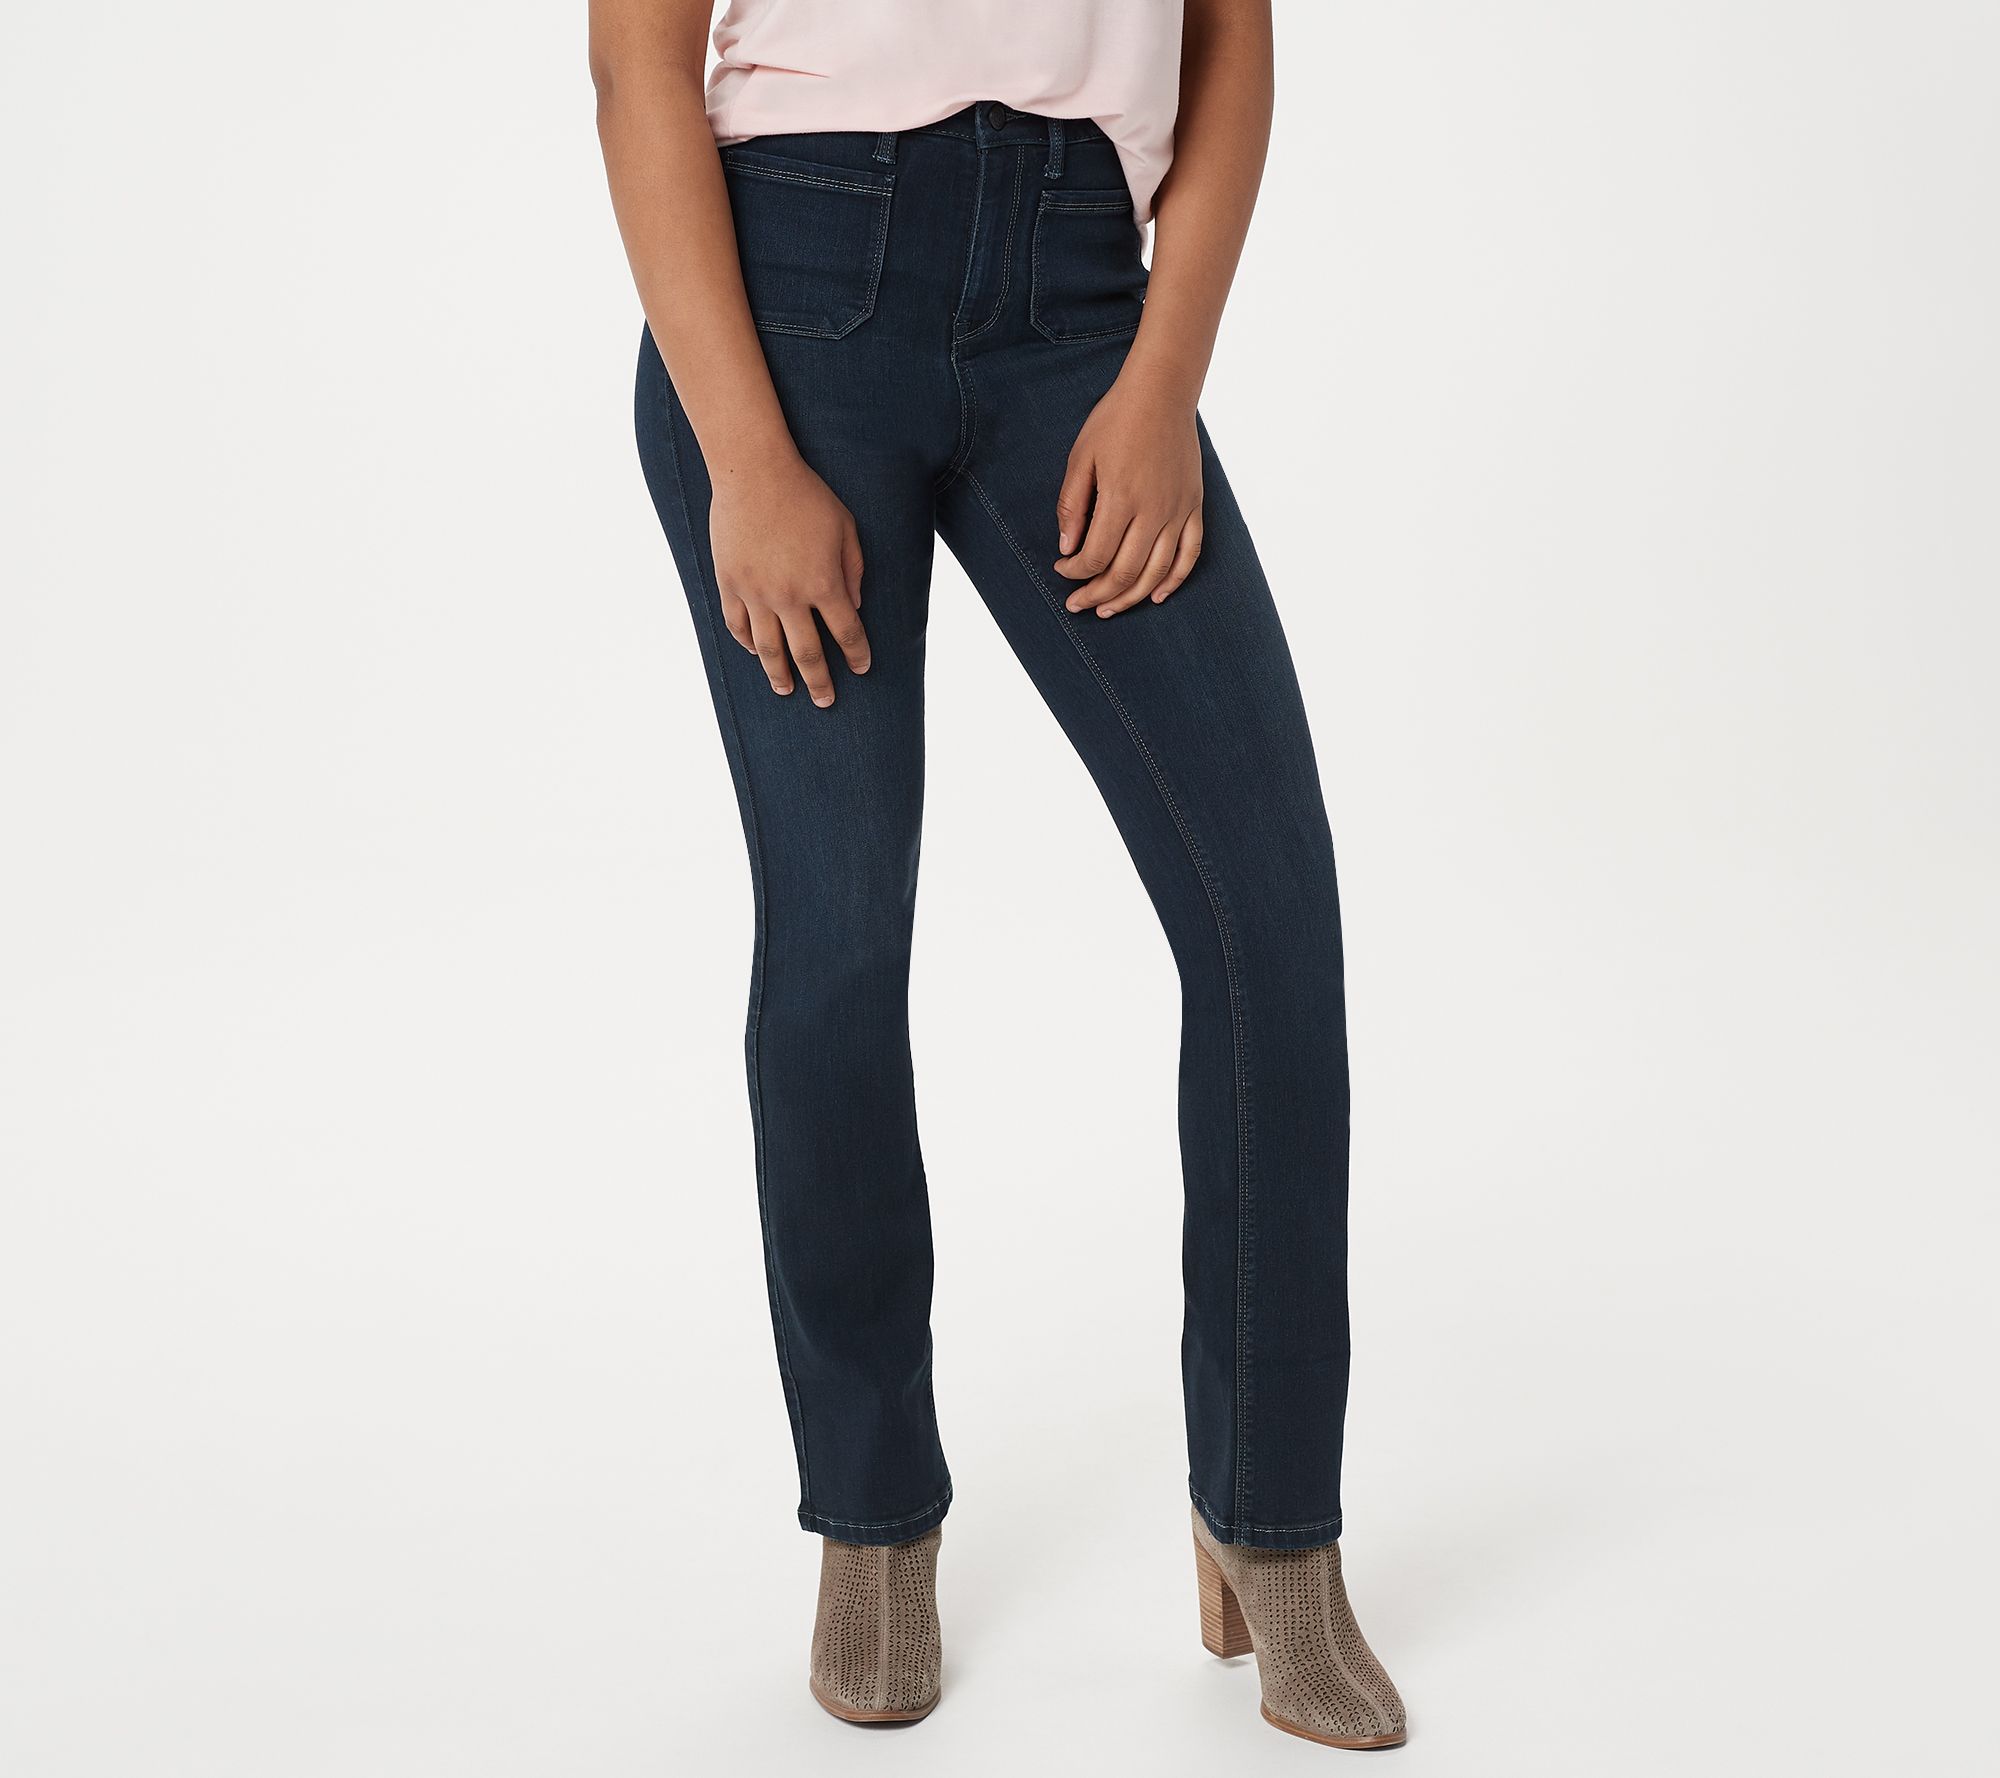 Laurie Felt Silky Denim High Waisted Patch Pocket Baby Bell Jeans - QVC.com